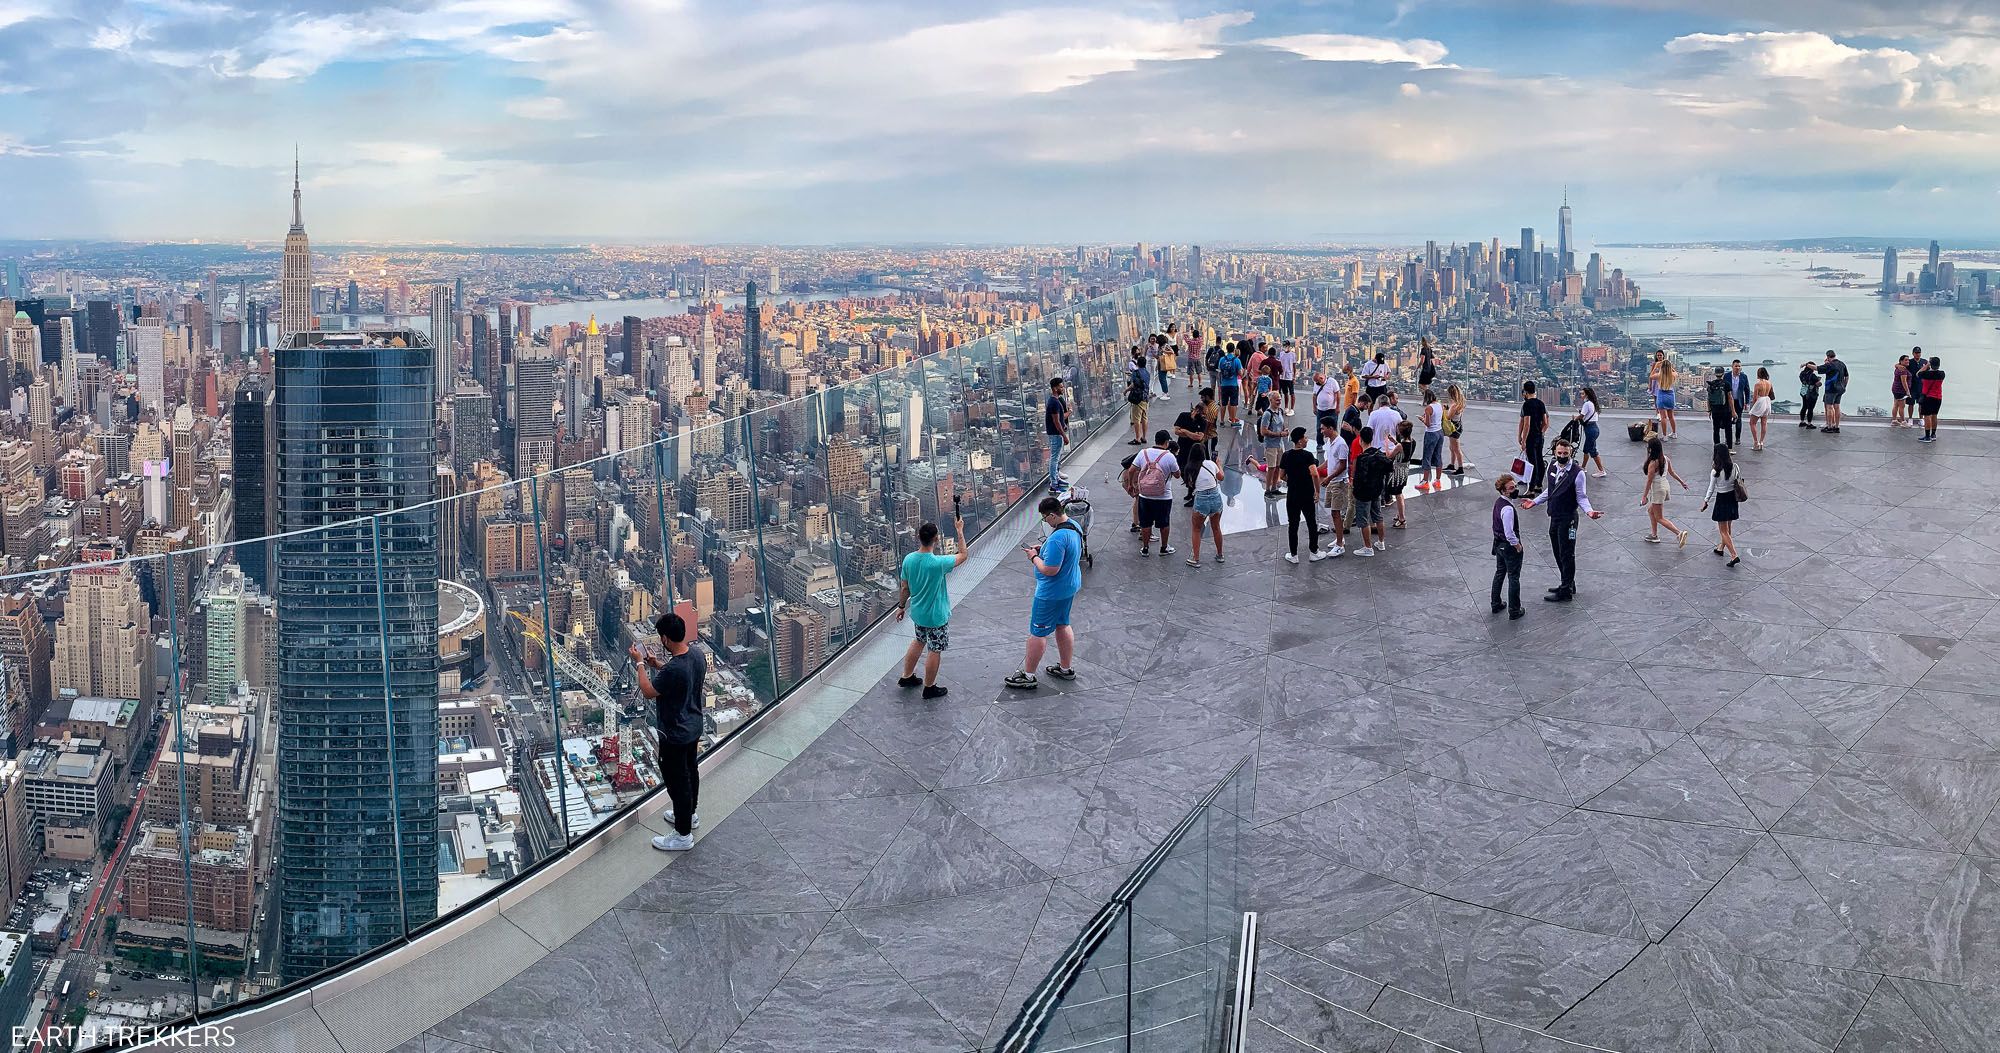 Featured image for “Complete Guide to Edge NYC & City Climb: New York’s City Most Thrilling View”